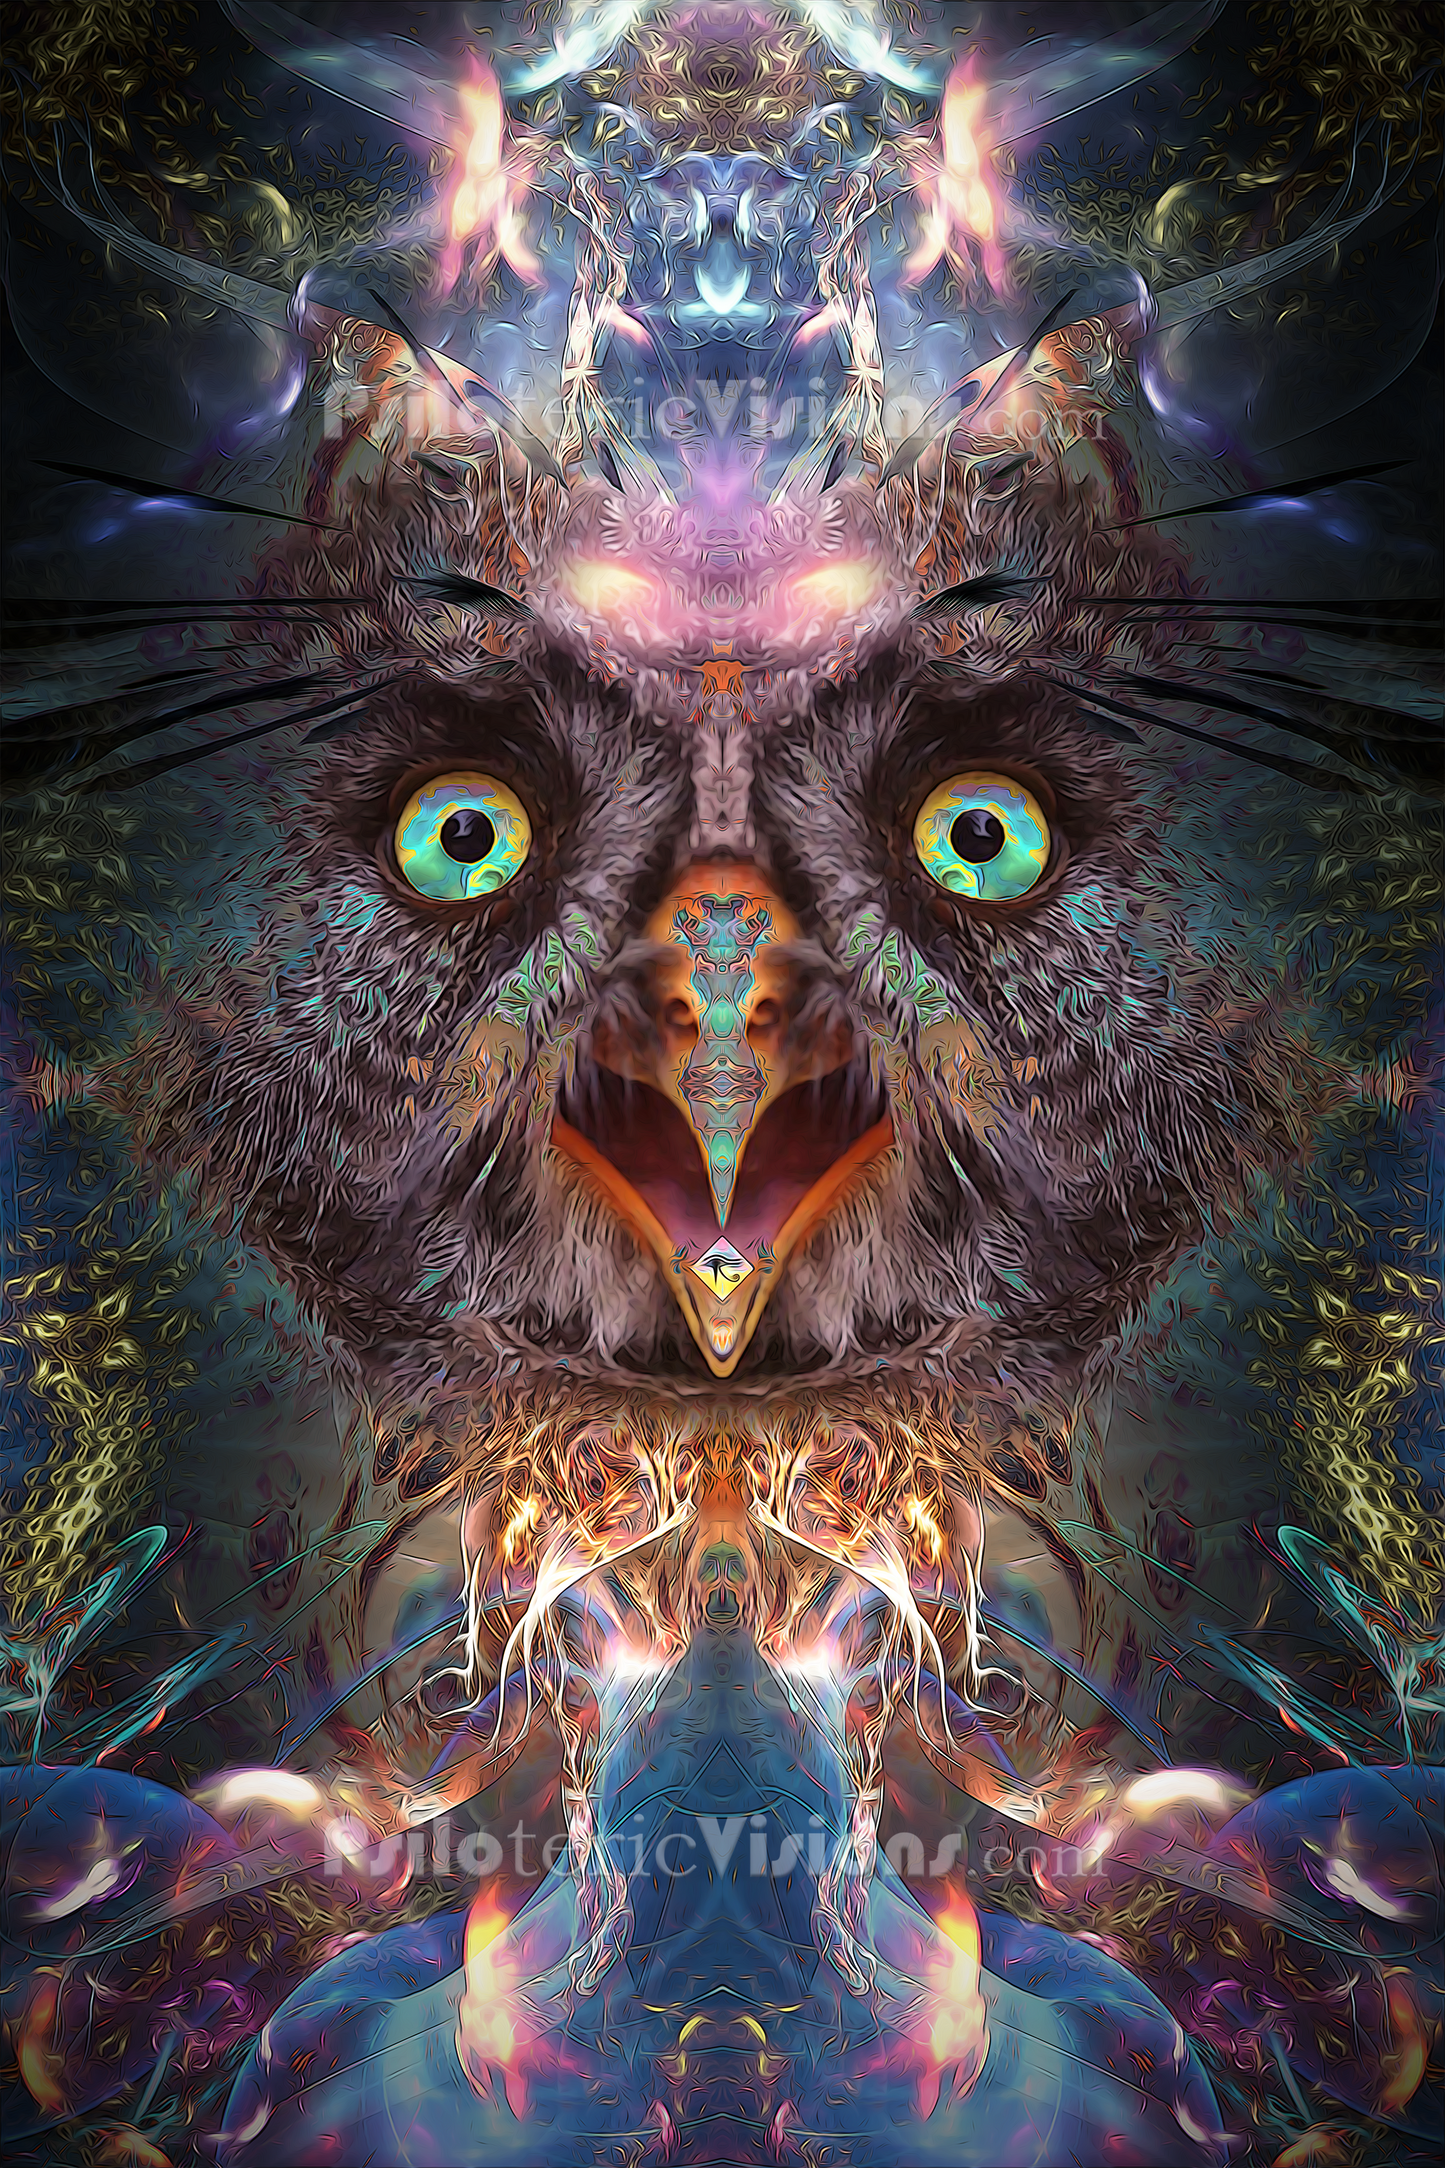 "Complete Awareness" - Trippy Owl POSTER